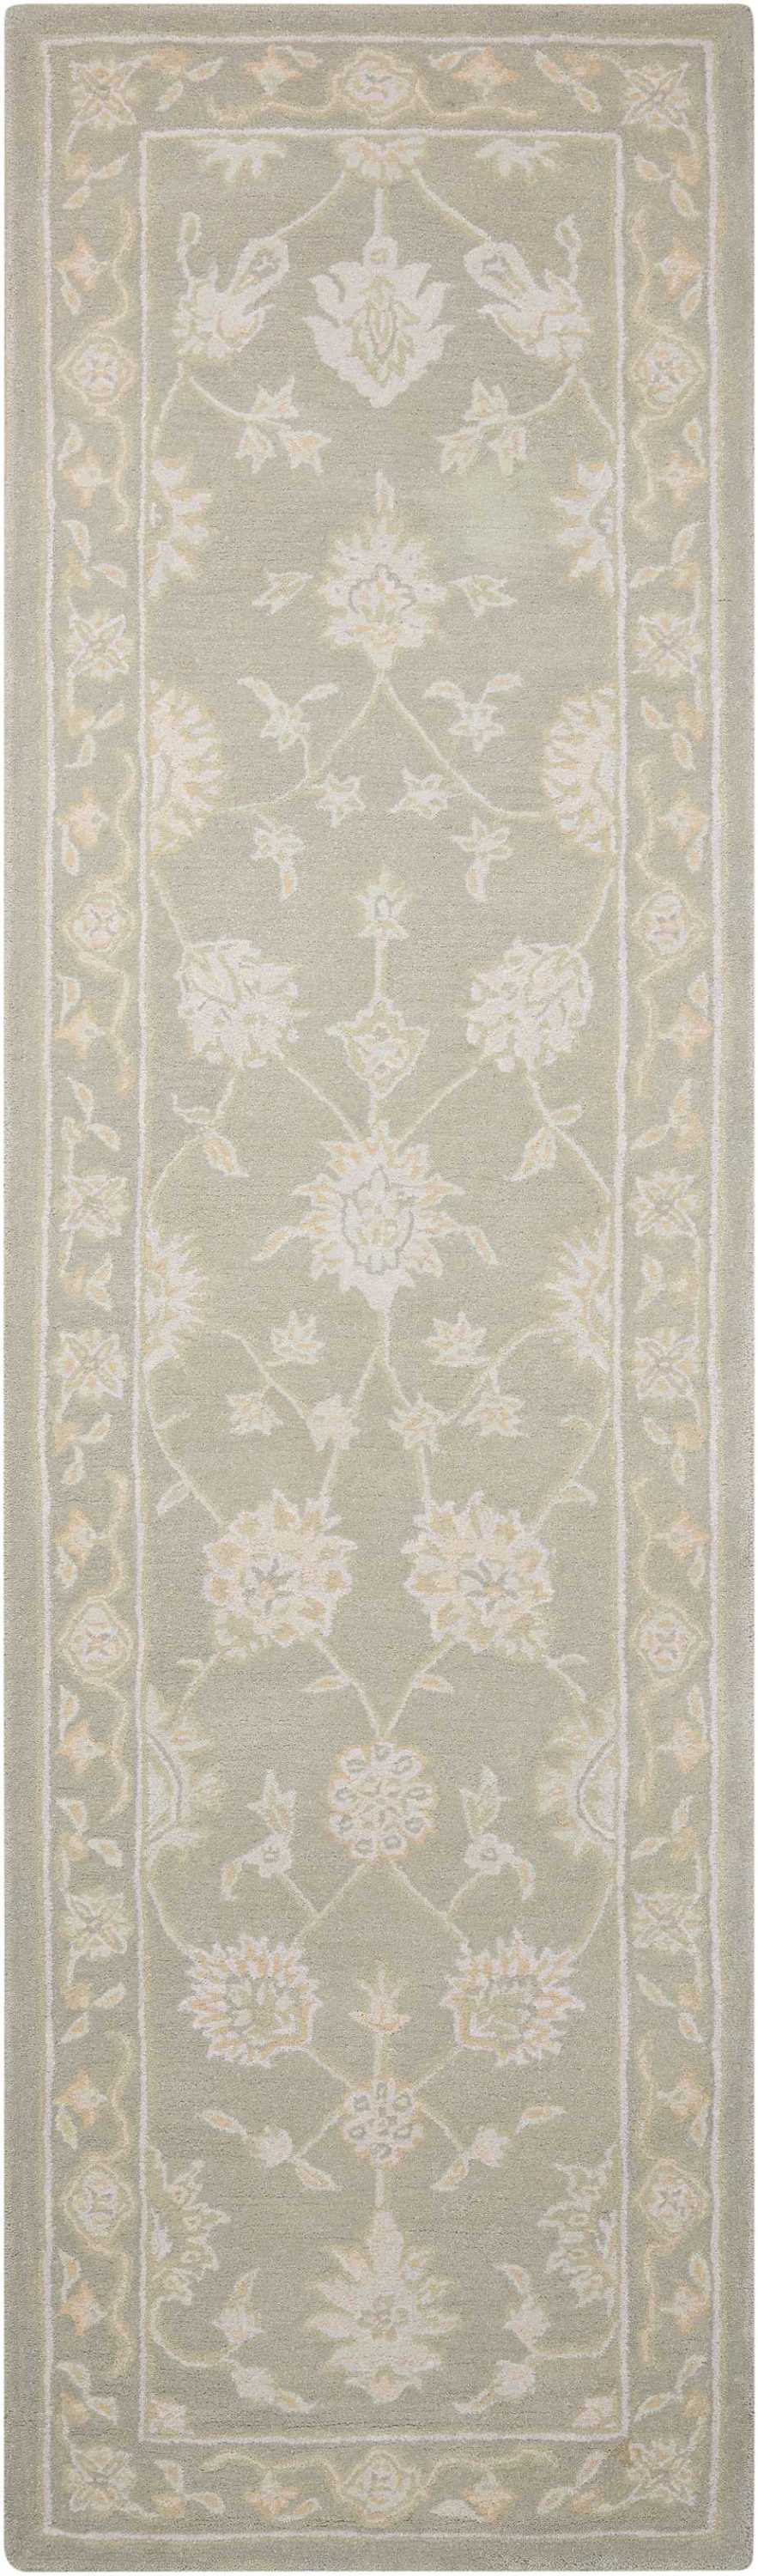 Nourison Home Zephyr ZEP02 Silver Traditional Tufted Rug